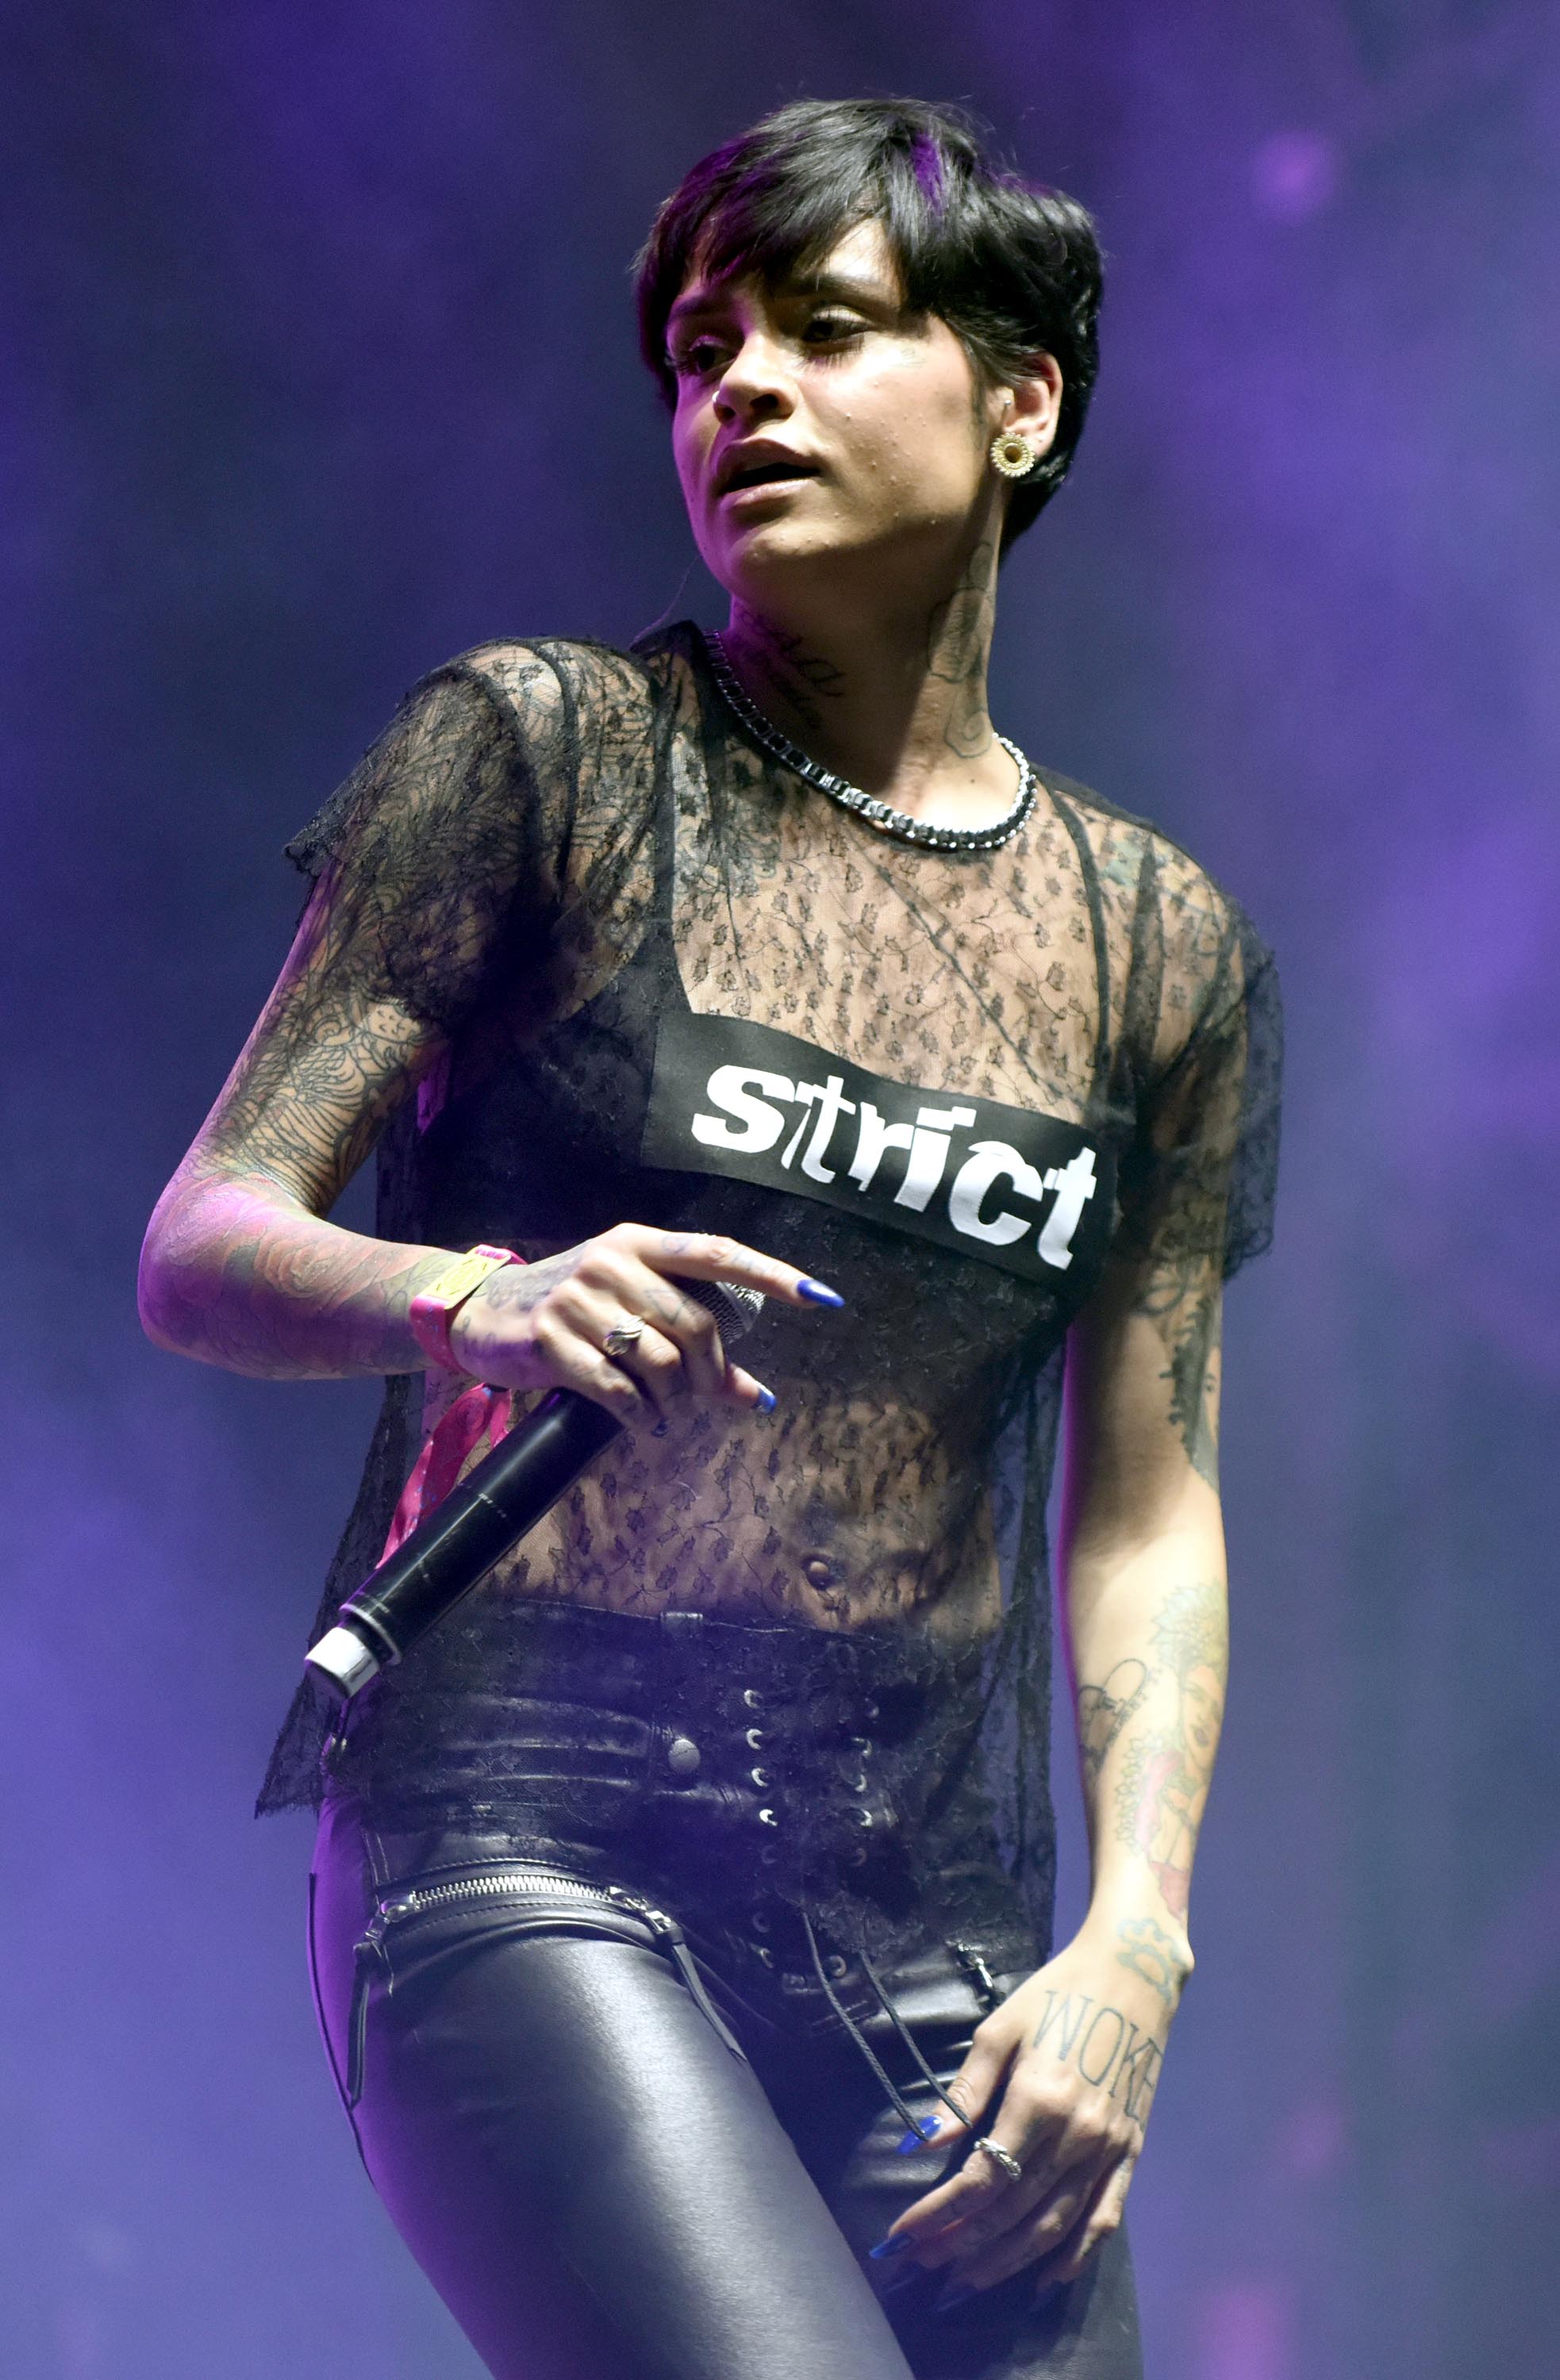 Kehlani performs during the 2016 Life is Beautiful festival